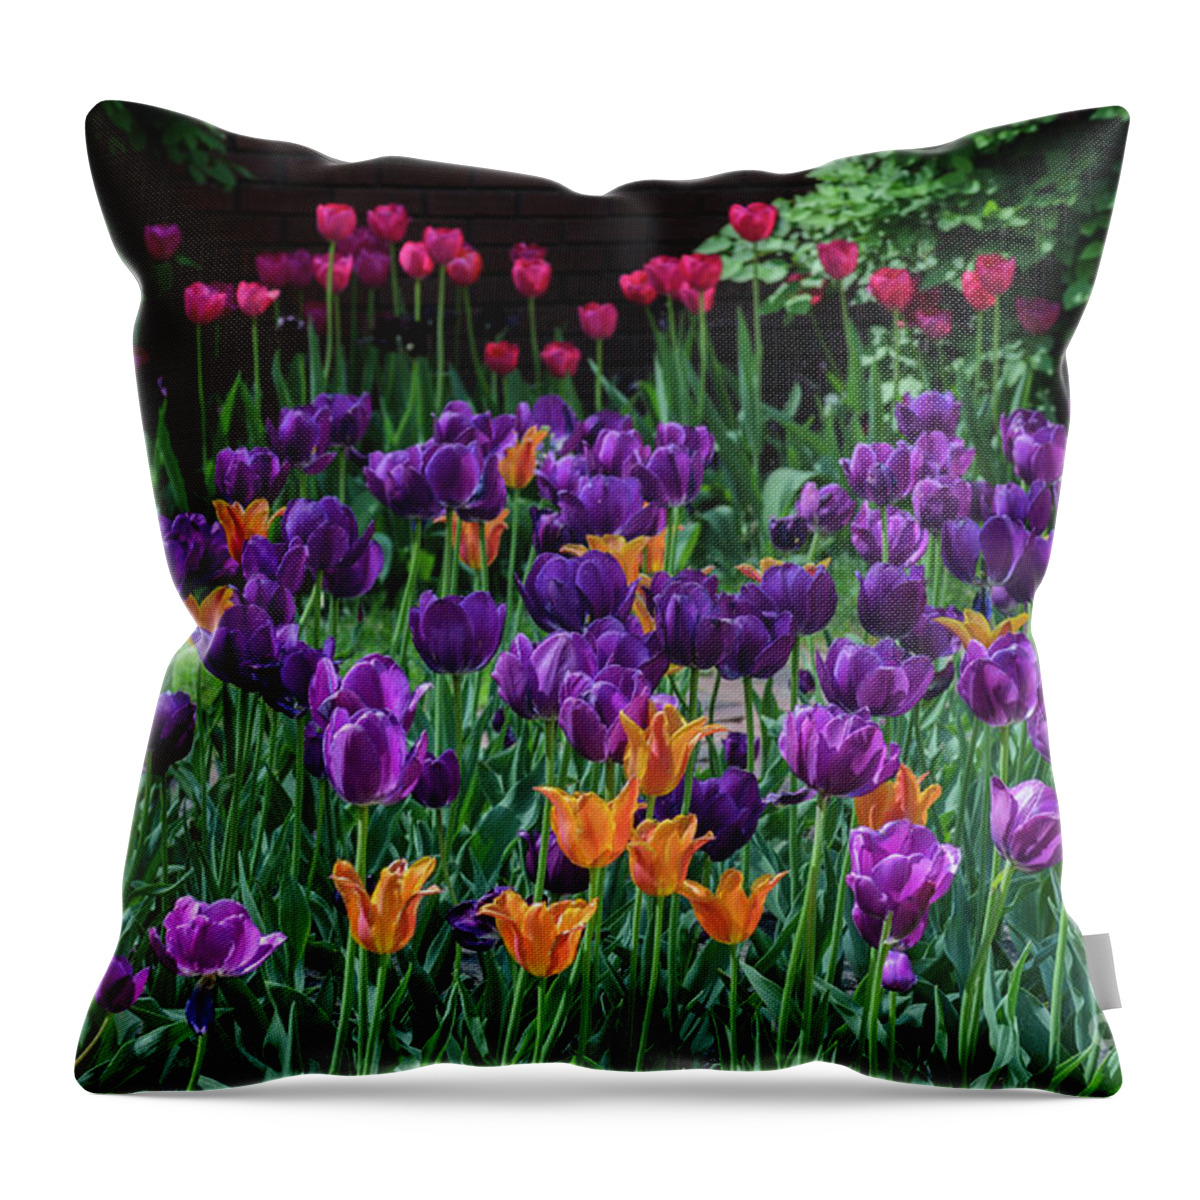 Tulips Throw Pillow featuring the photograph Spring Tulip Bed by Tamara Becker